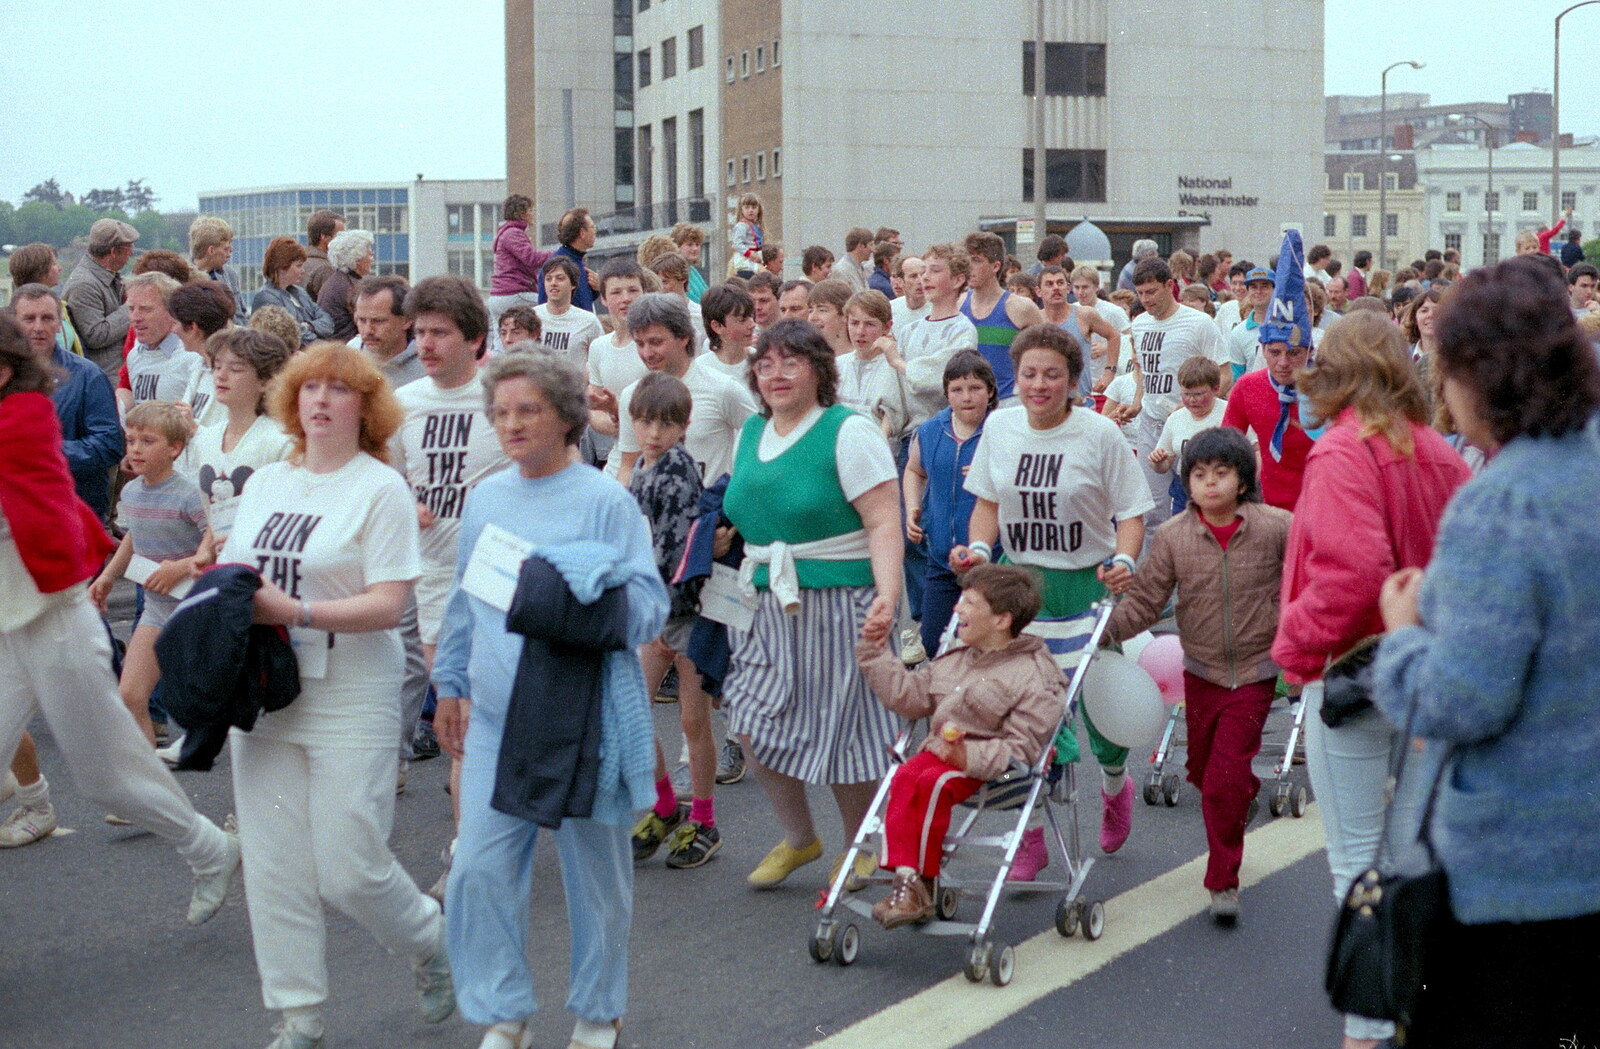 Pushing a pram around for 10km from Uni: Sport Aid - Run The World, Plymouth, Devon - 25th May 1986